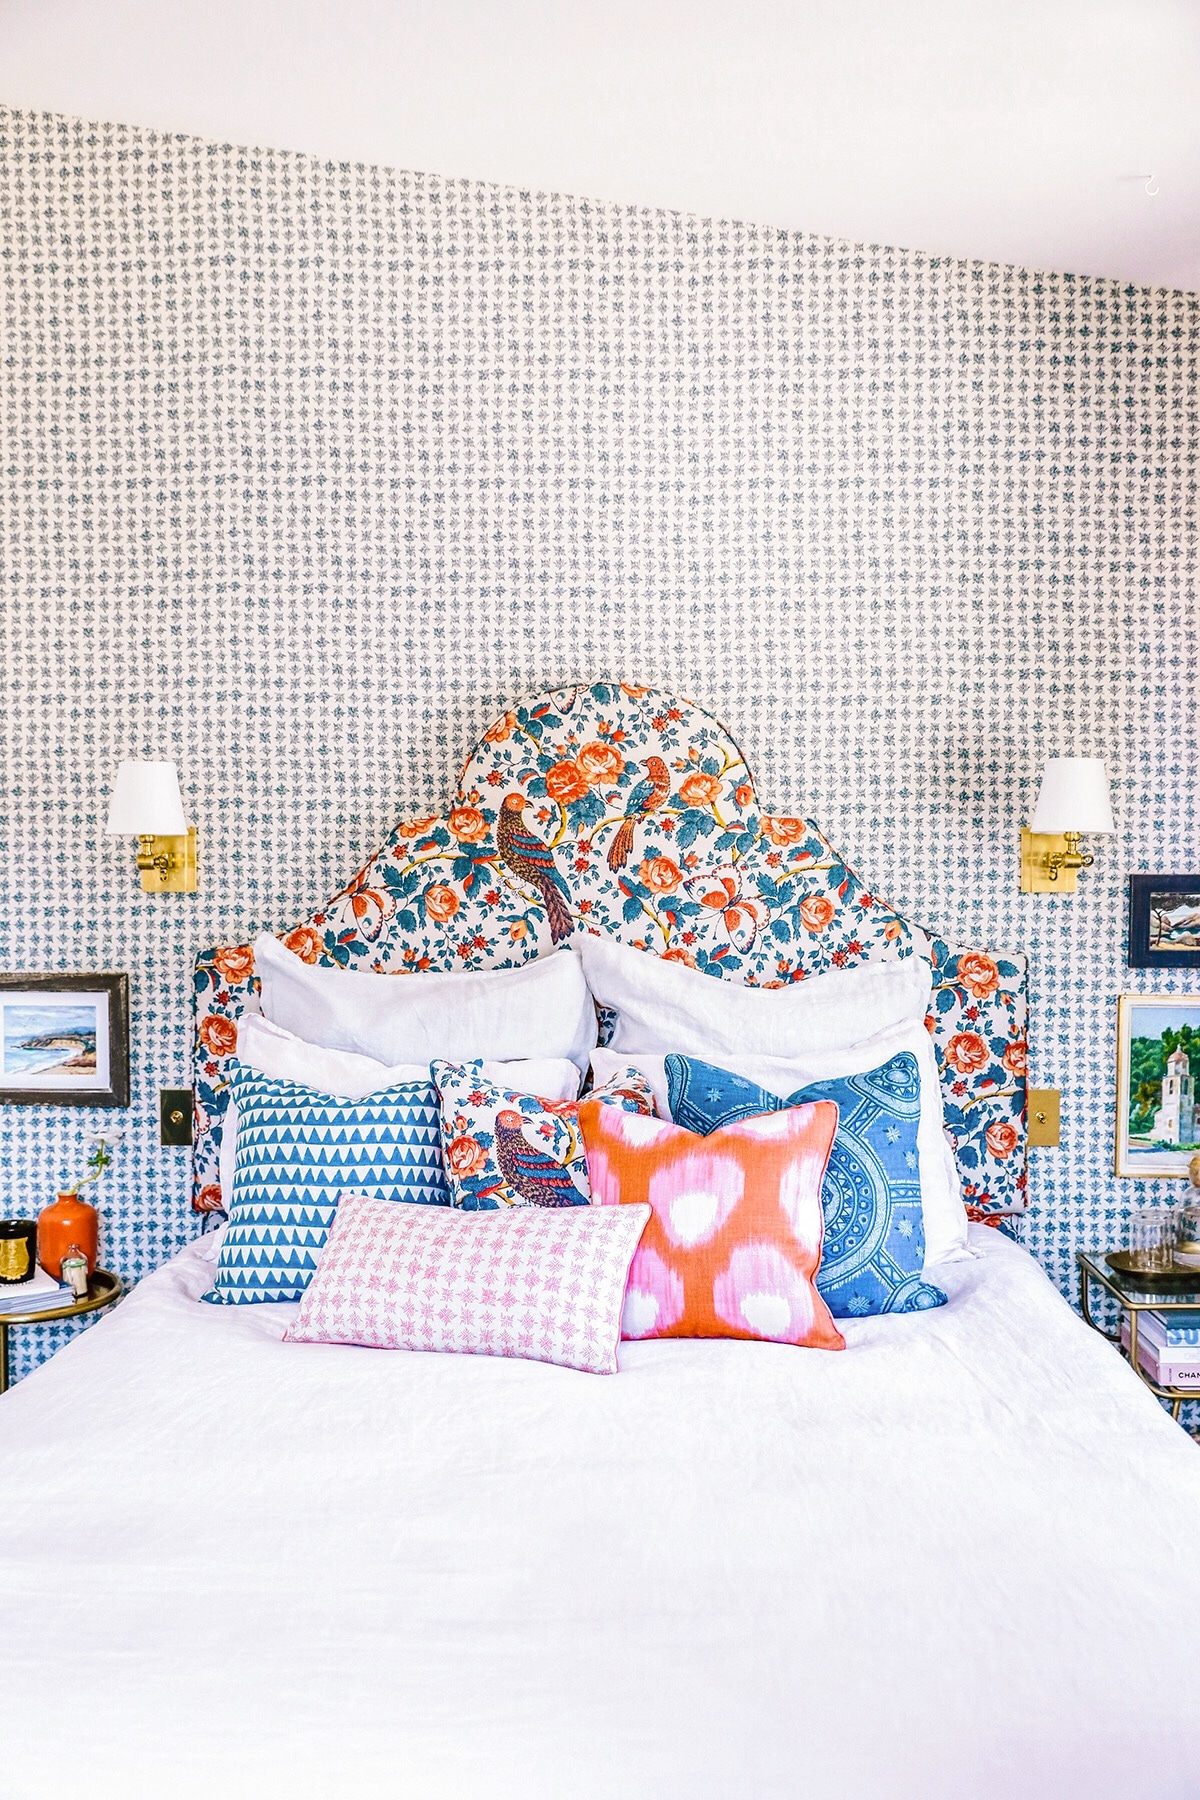 guest bedroom with layered pattern in blue, orange and pink | via coco kelley